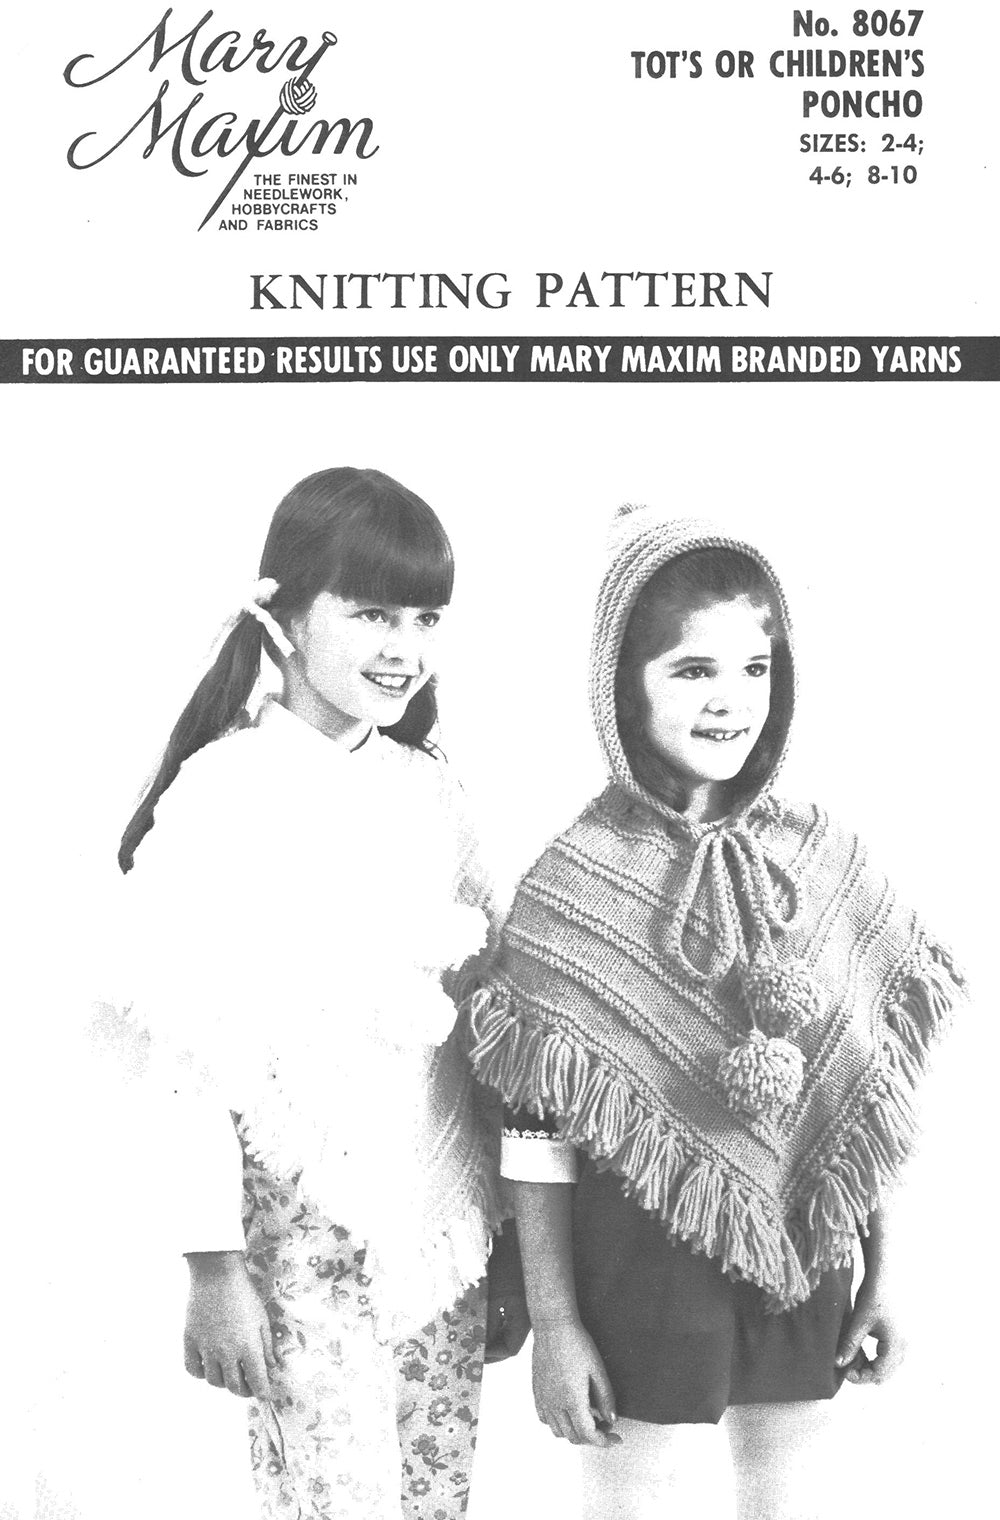 Tot's Or Children's Poncho Pattern.